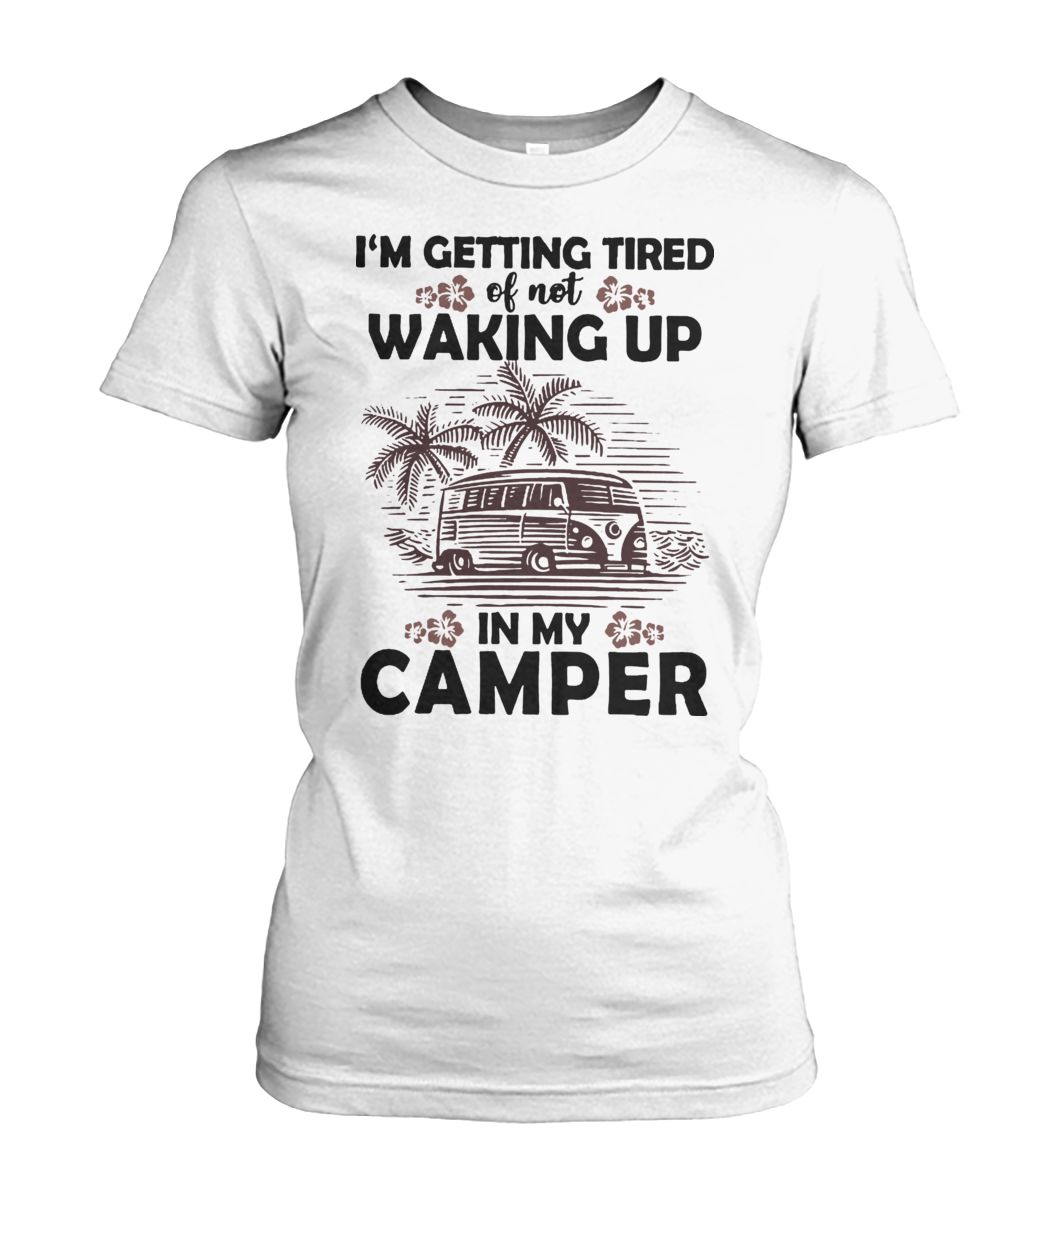 Camping I'm getting tired of not waking up in my camper women's crew tee